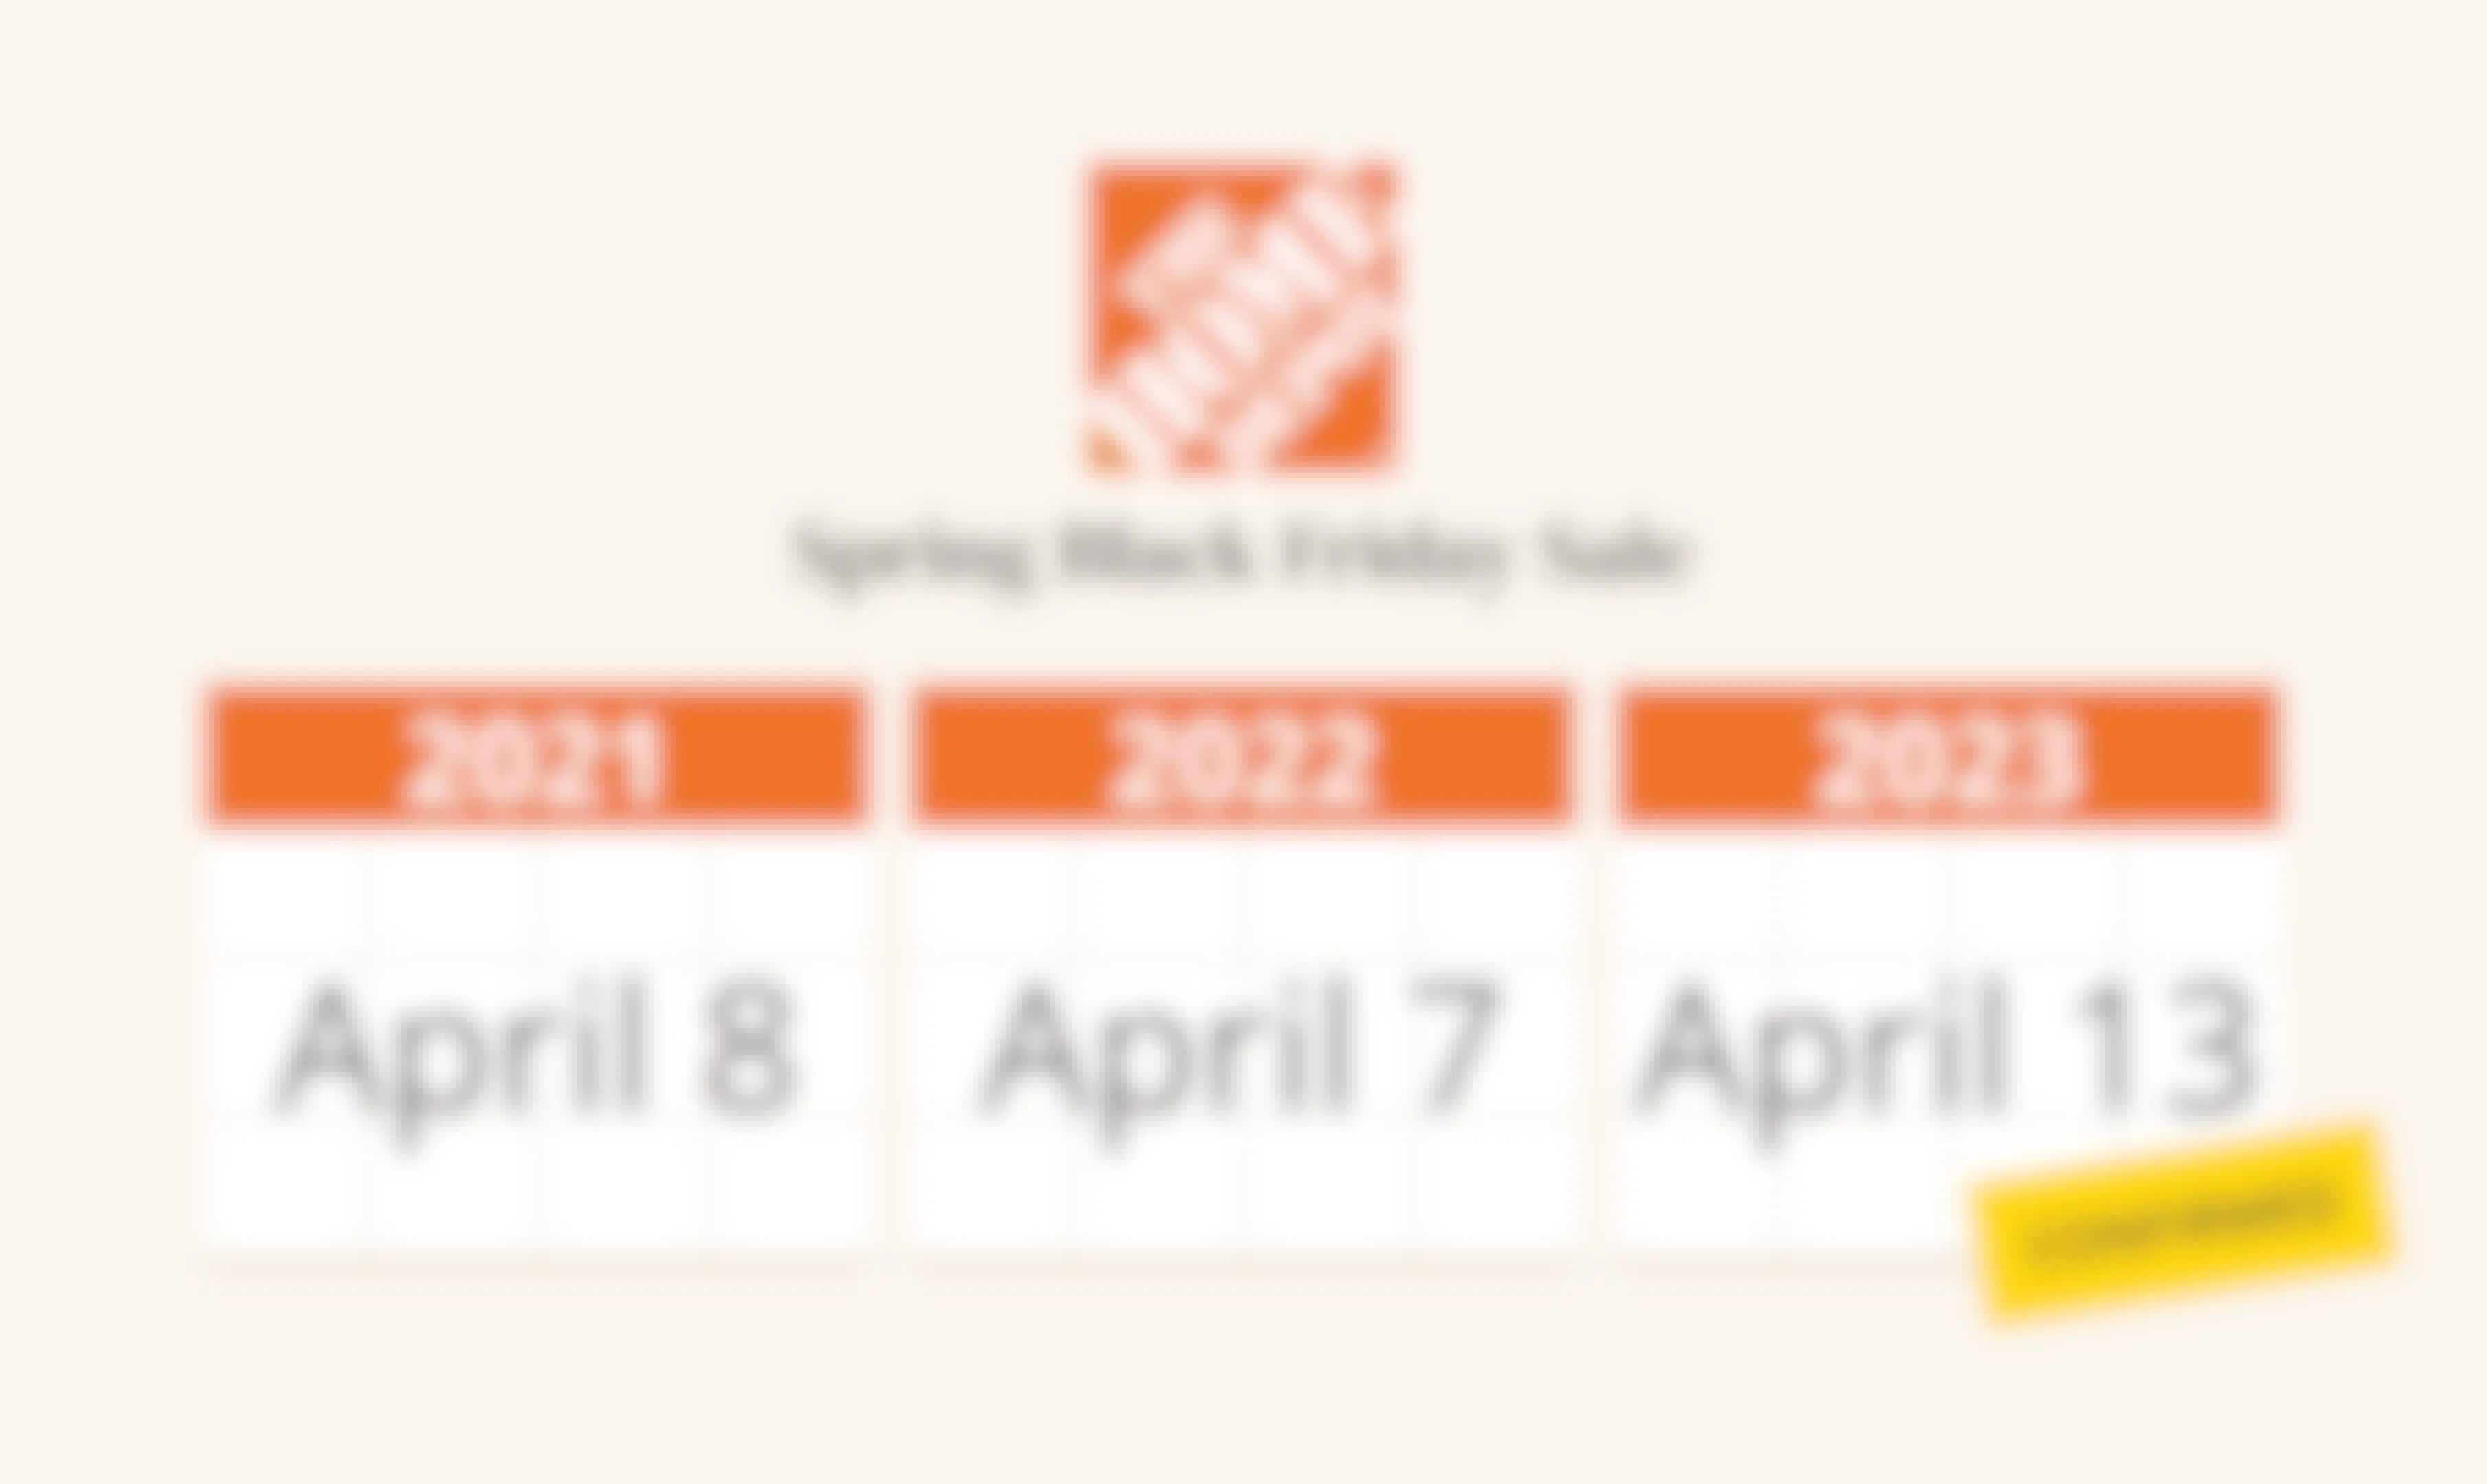 Start dates for the Home Depot Spring Black Friday sale for the past few years.